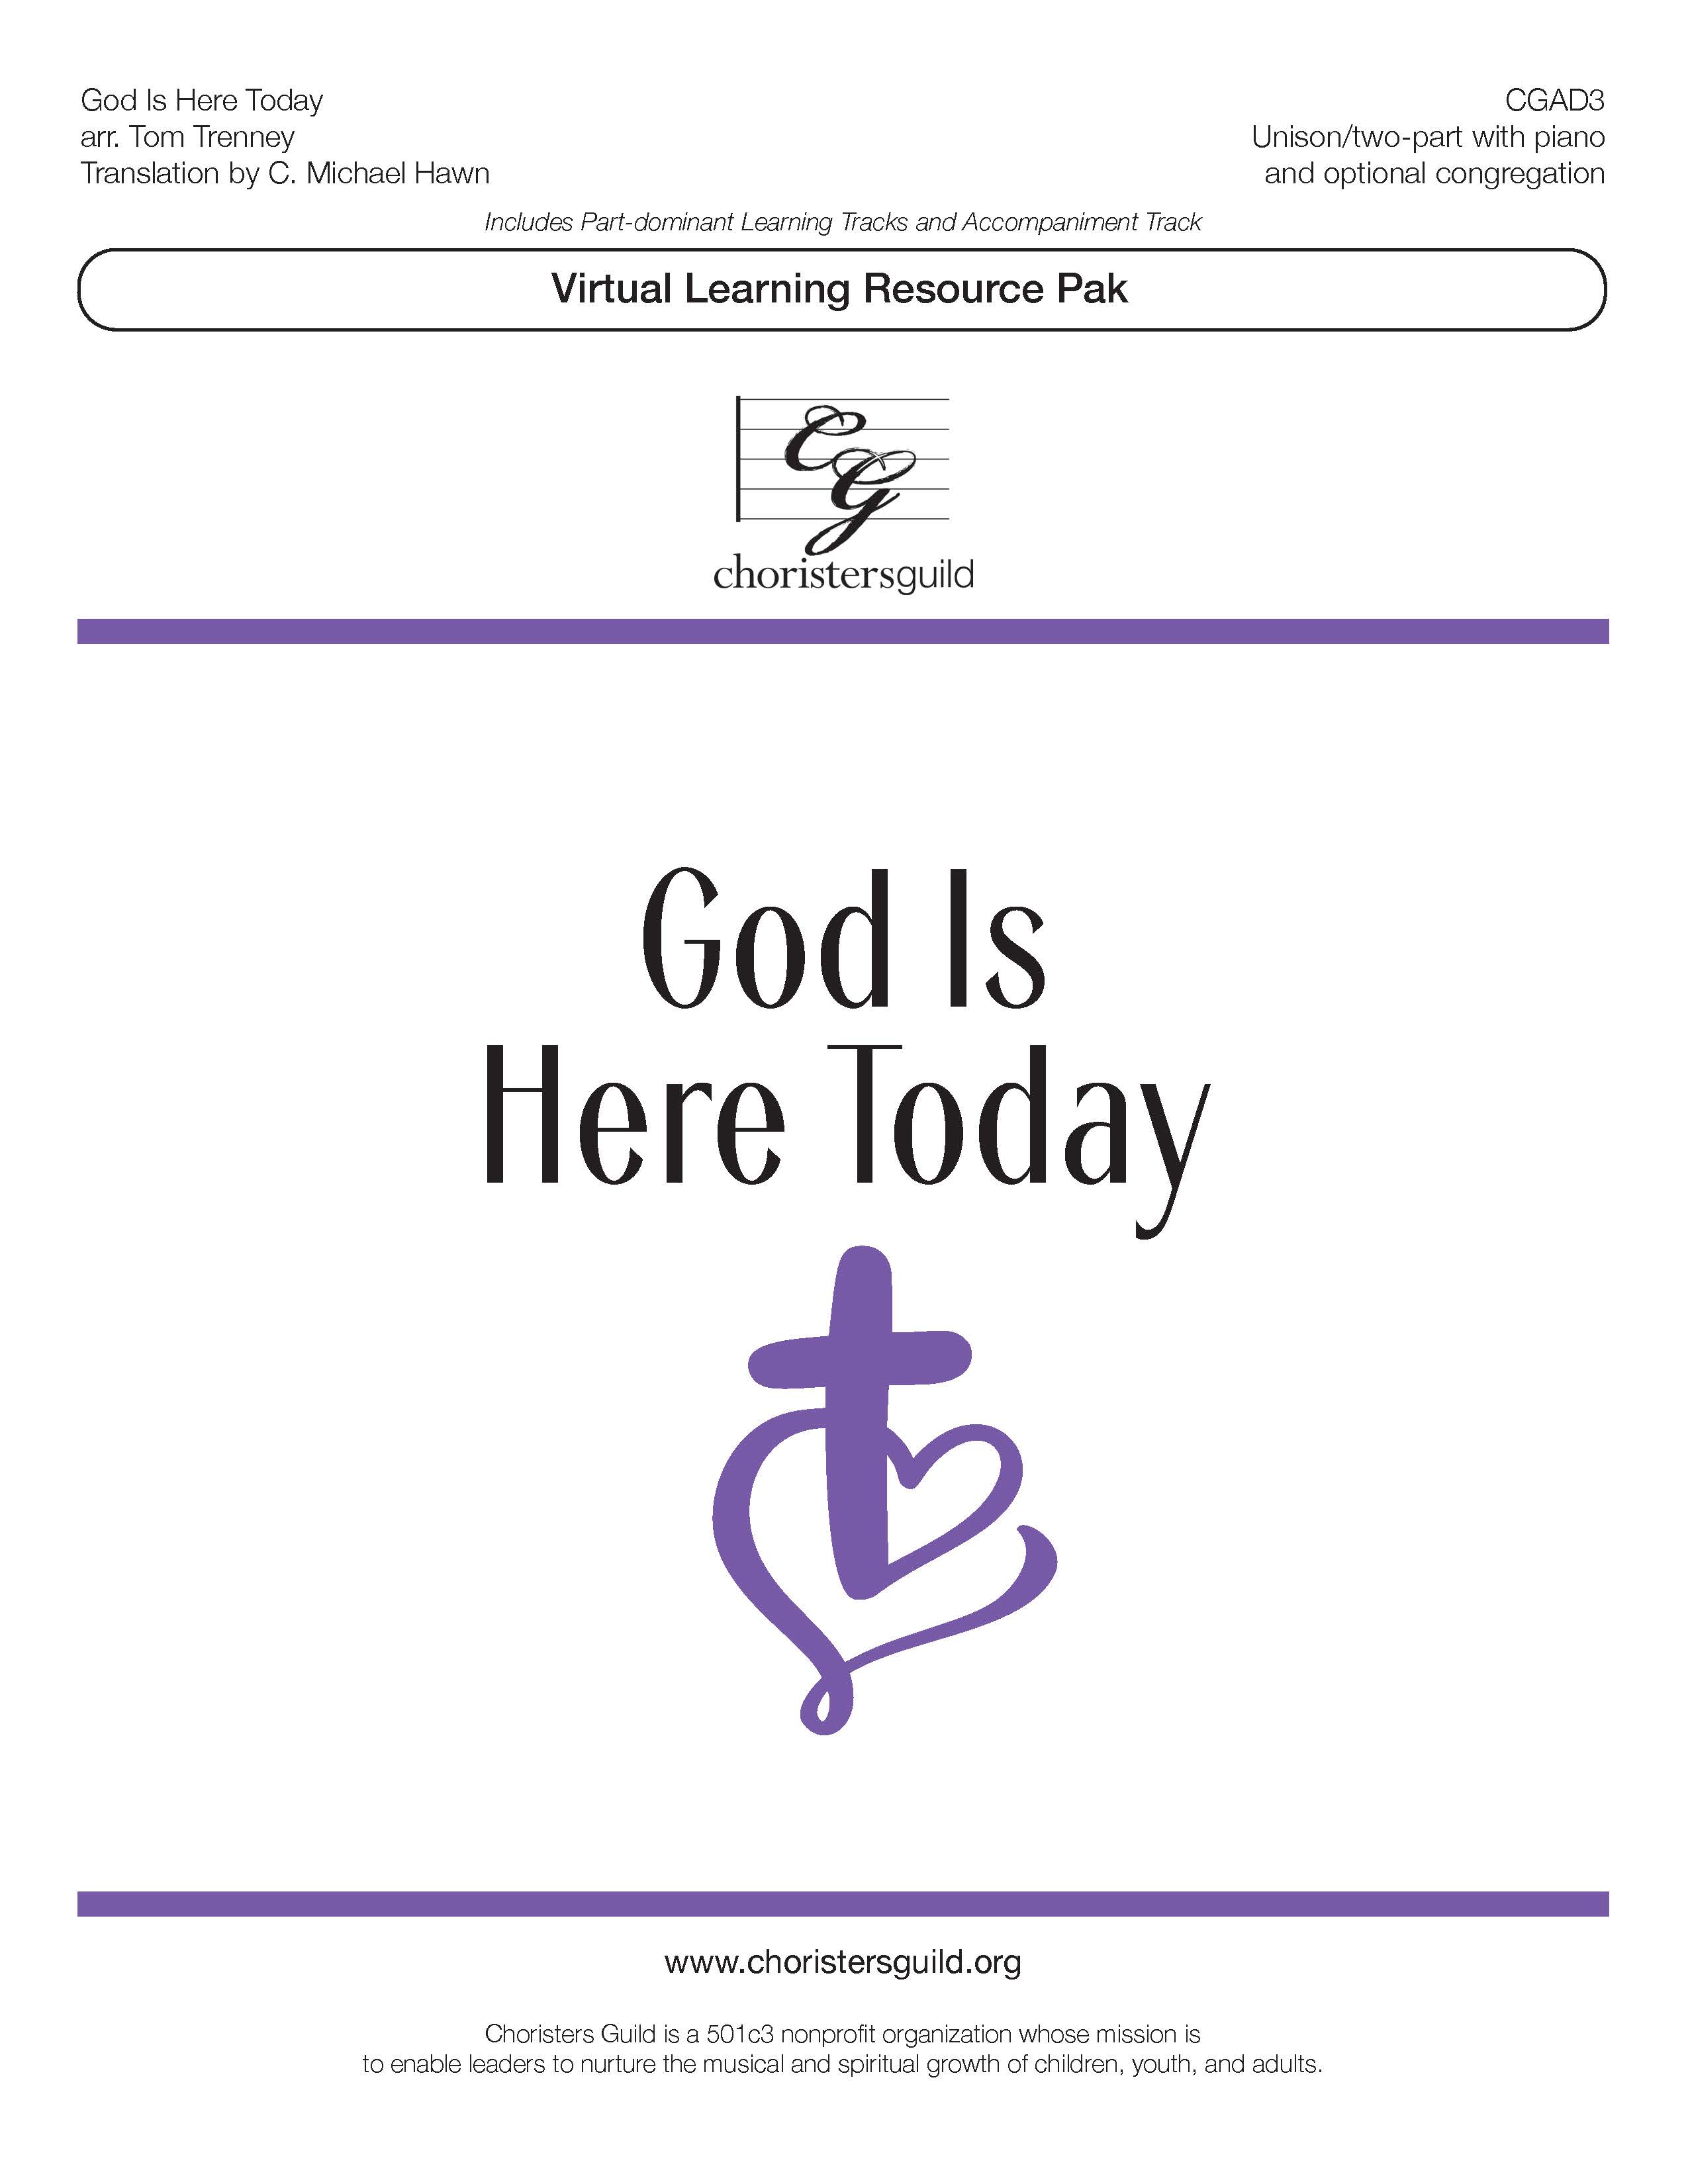 God is Here Today (Virtual Learning Resource Pak) - Unison/Two-part